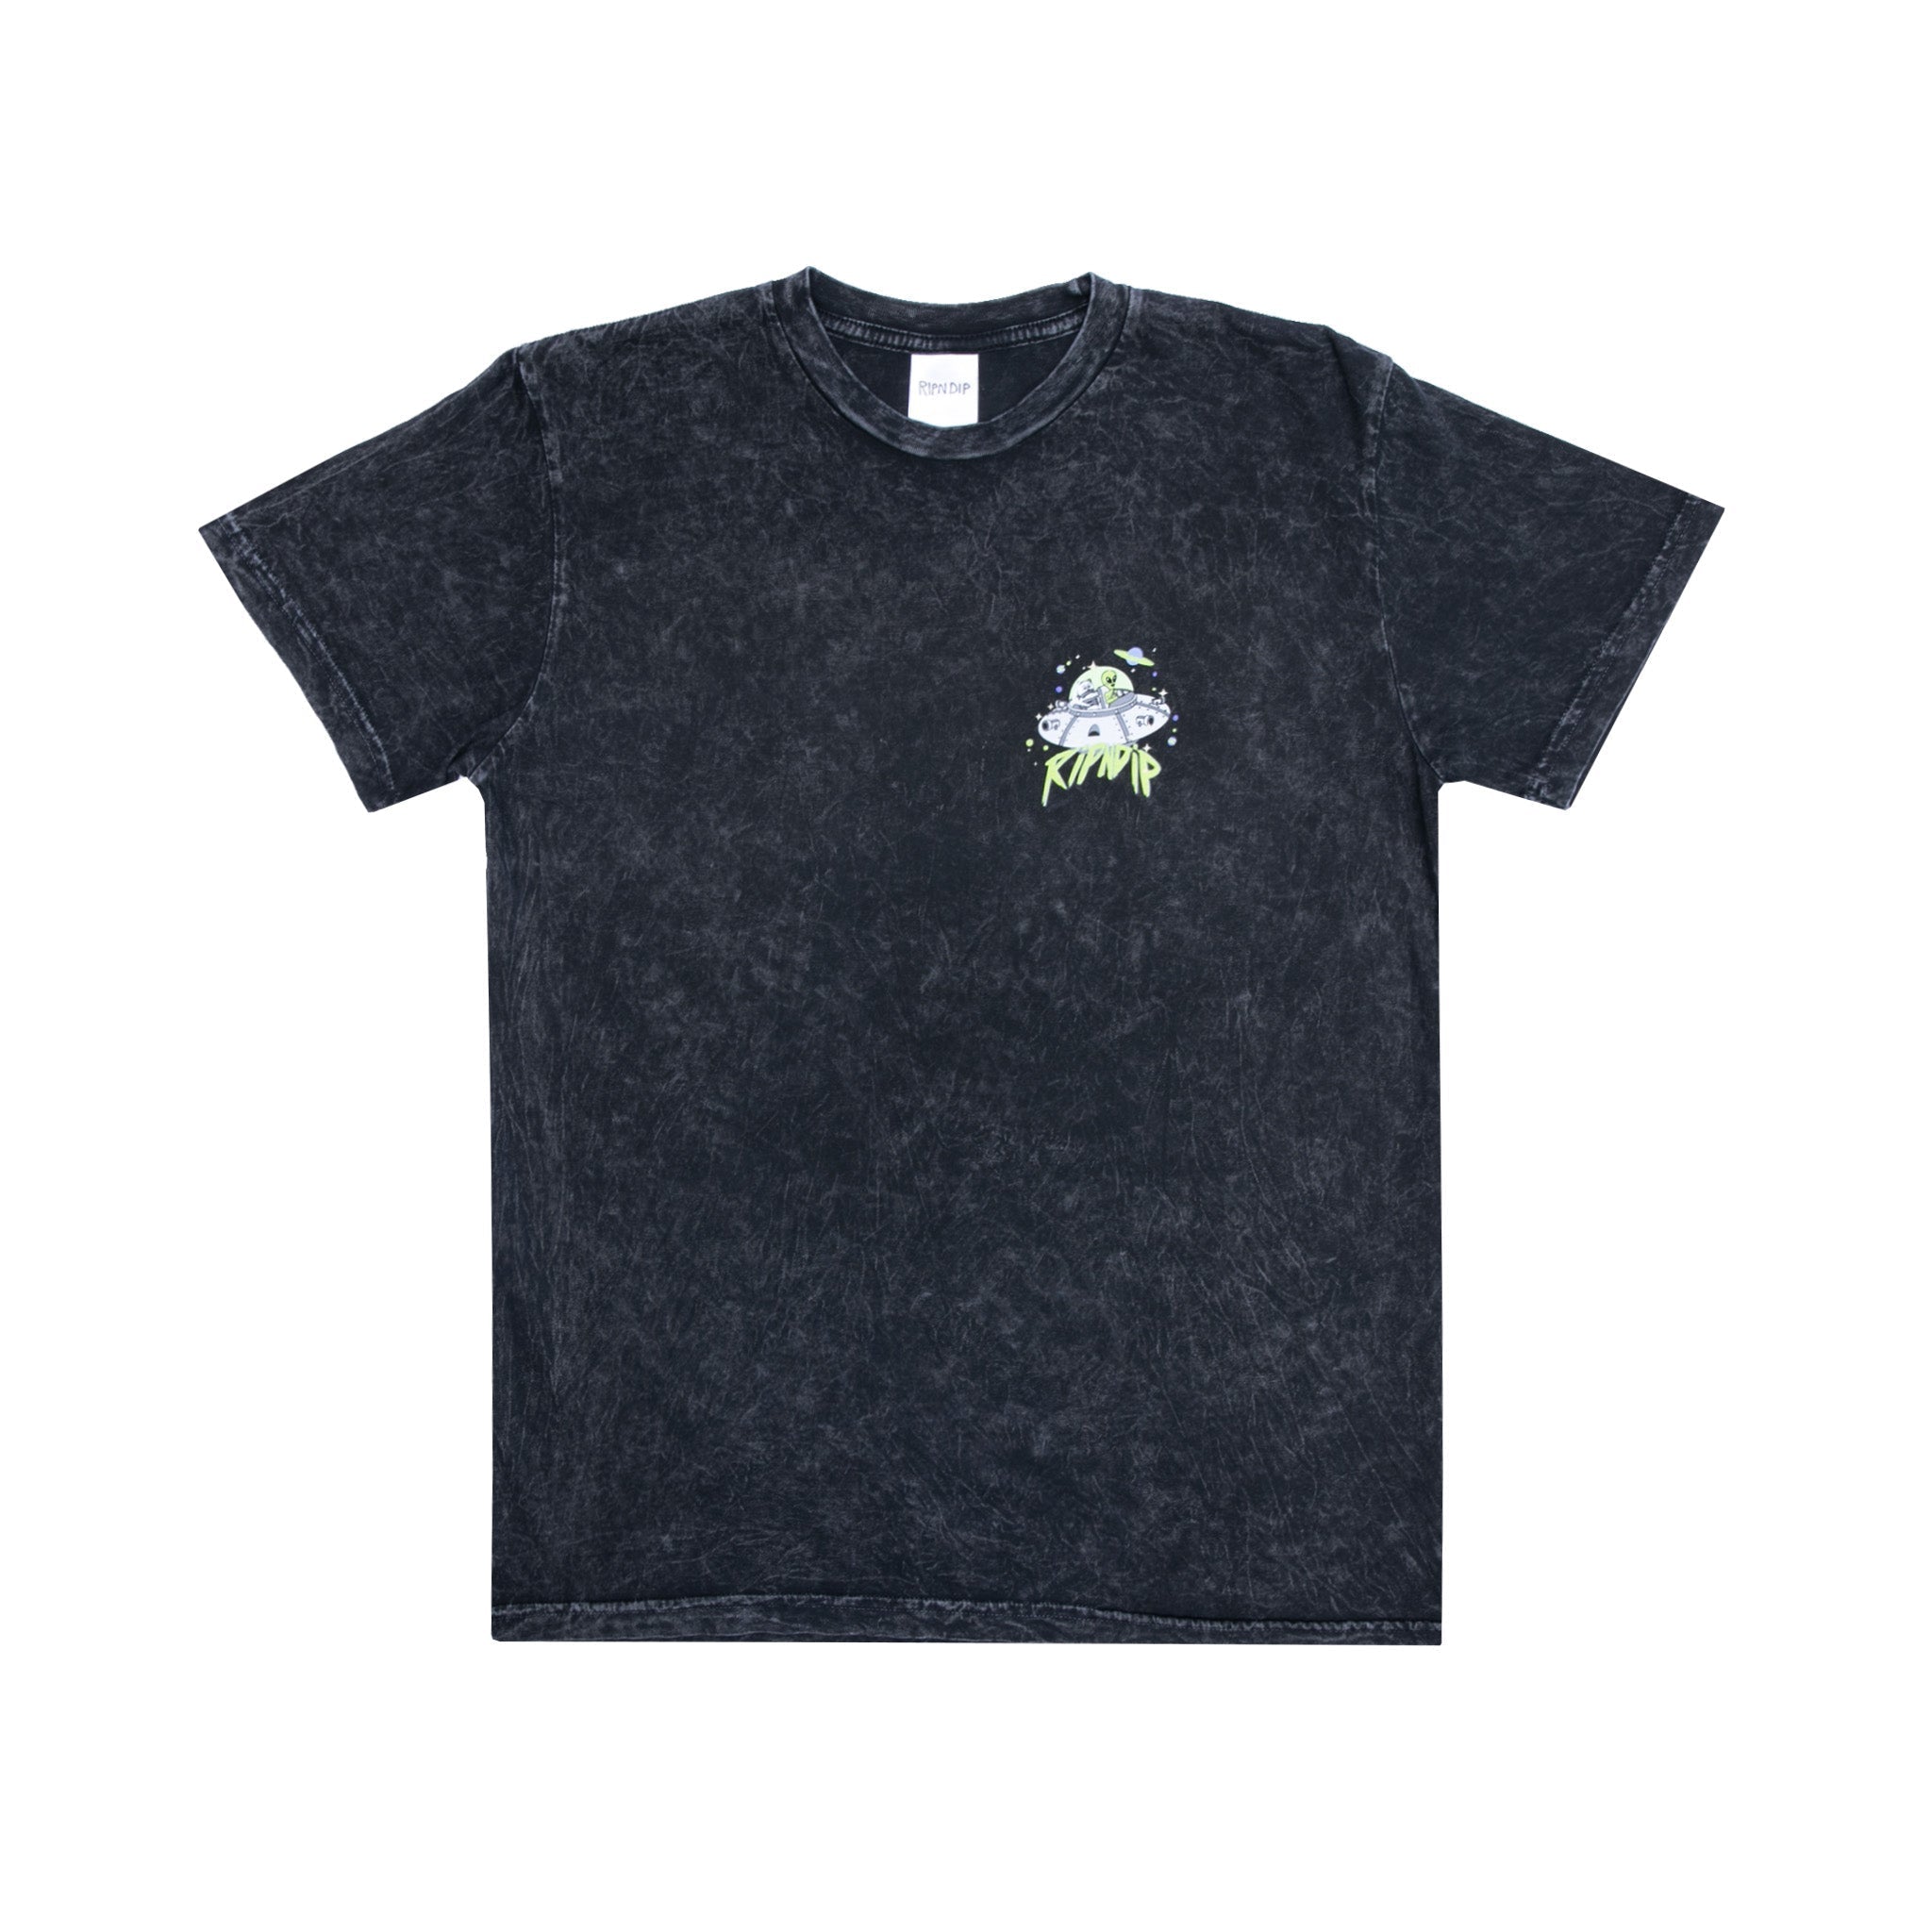 Abduction Tee (Black Mineral Wash)